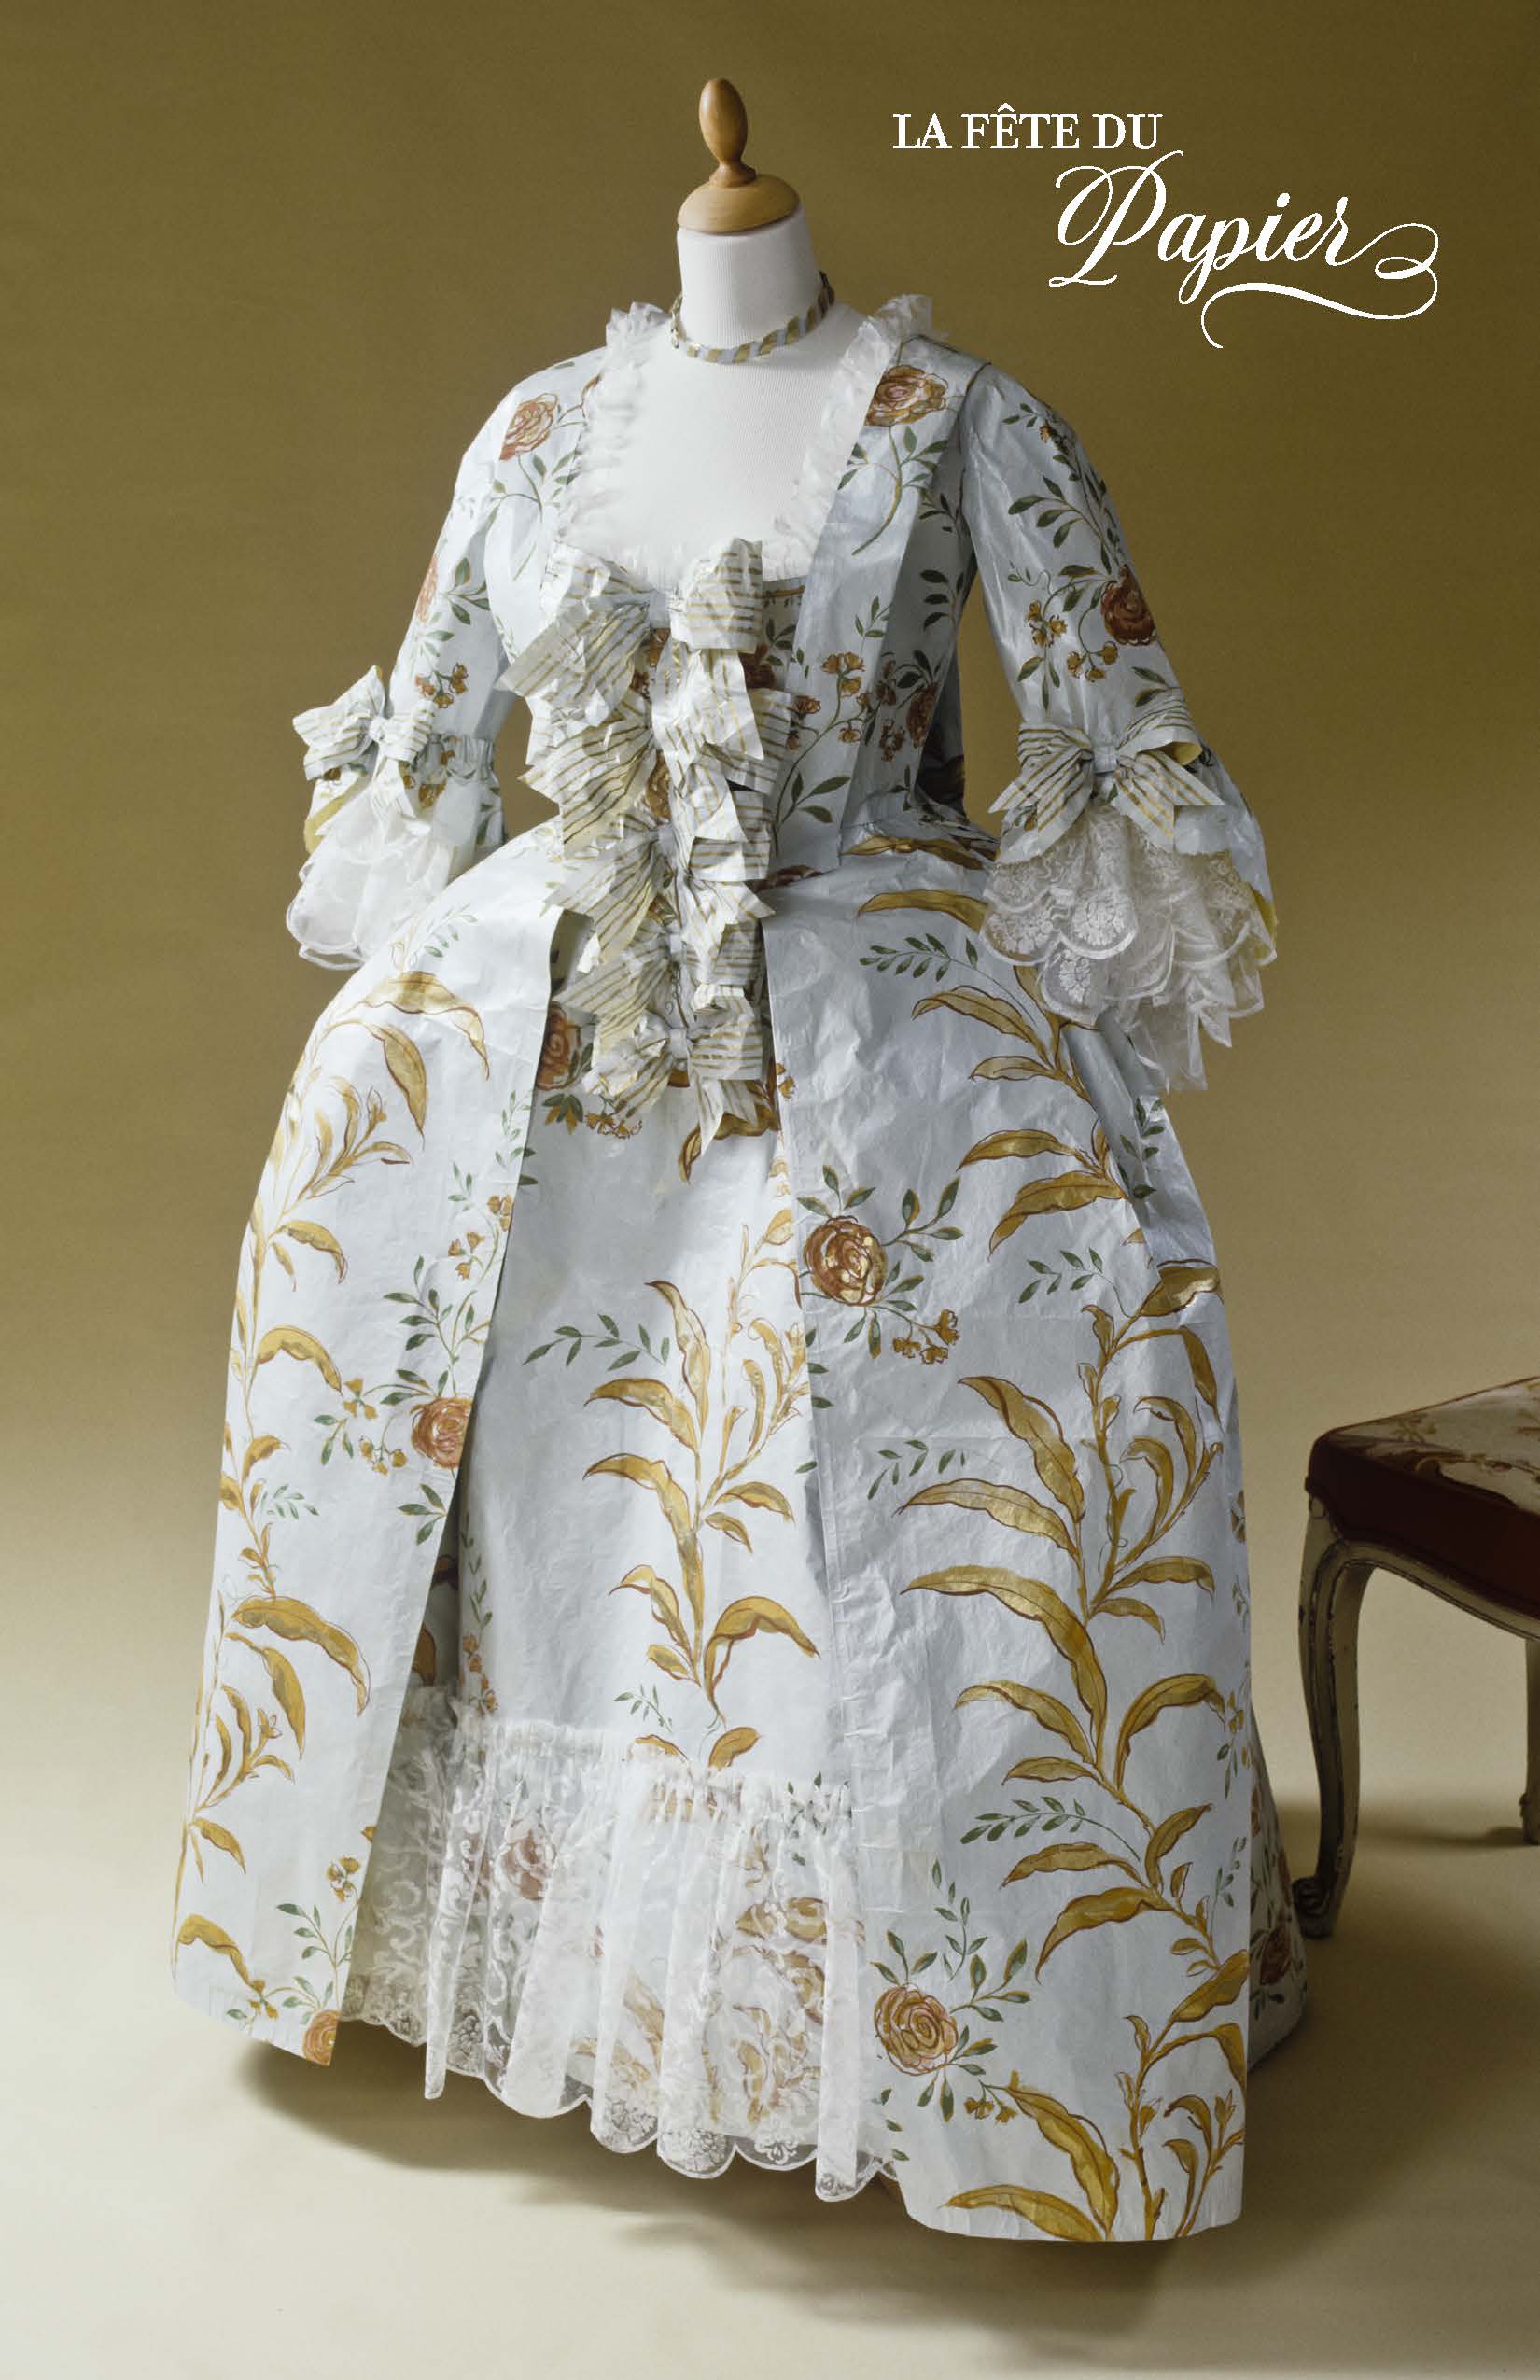 Life-size Madame de Pompadour Court Dress in white with gold fern patterns.